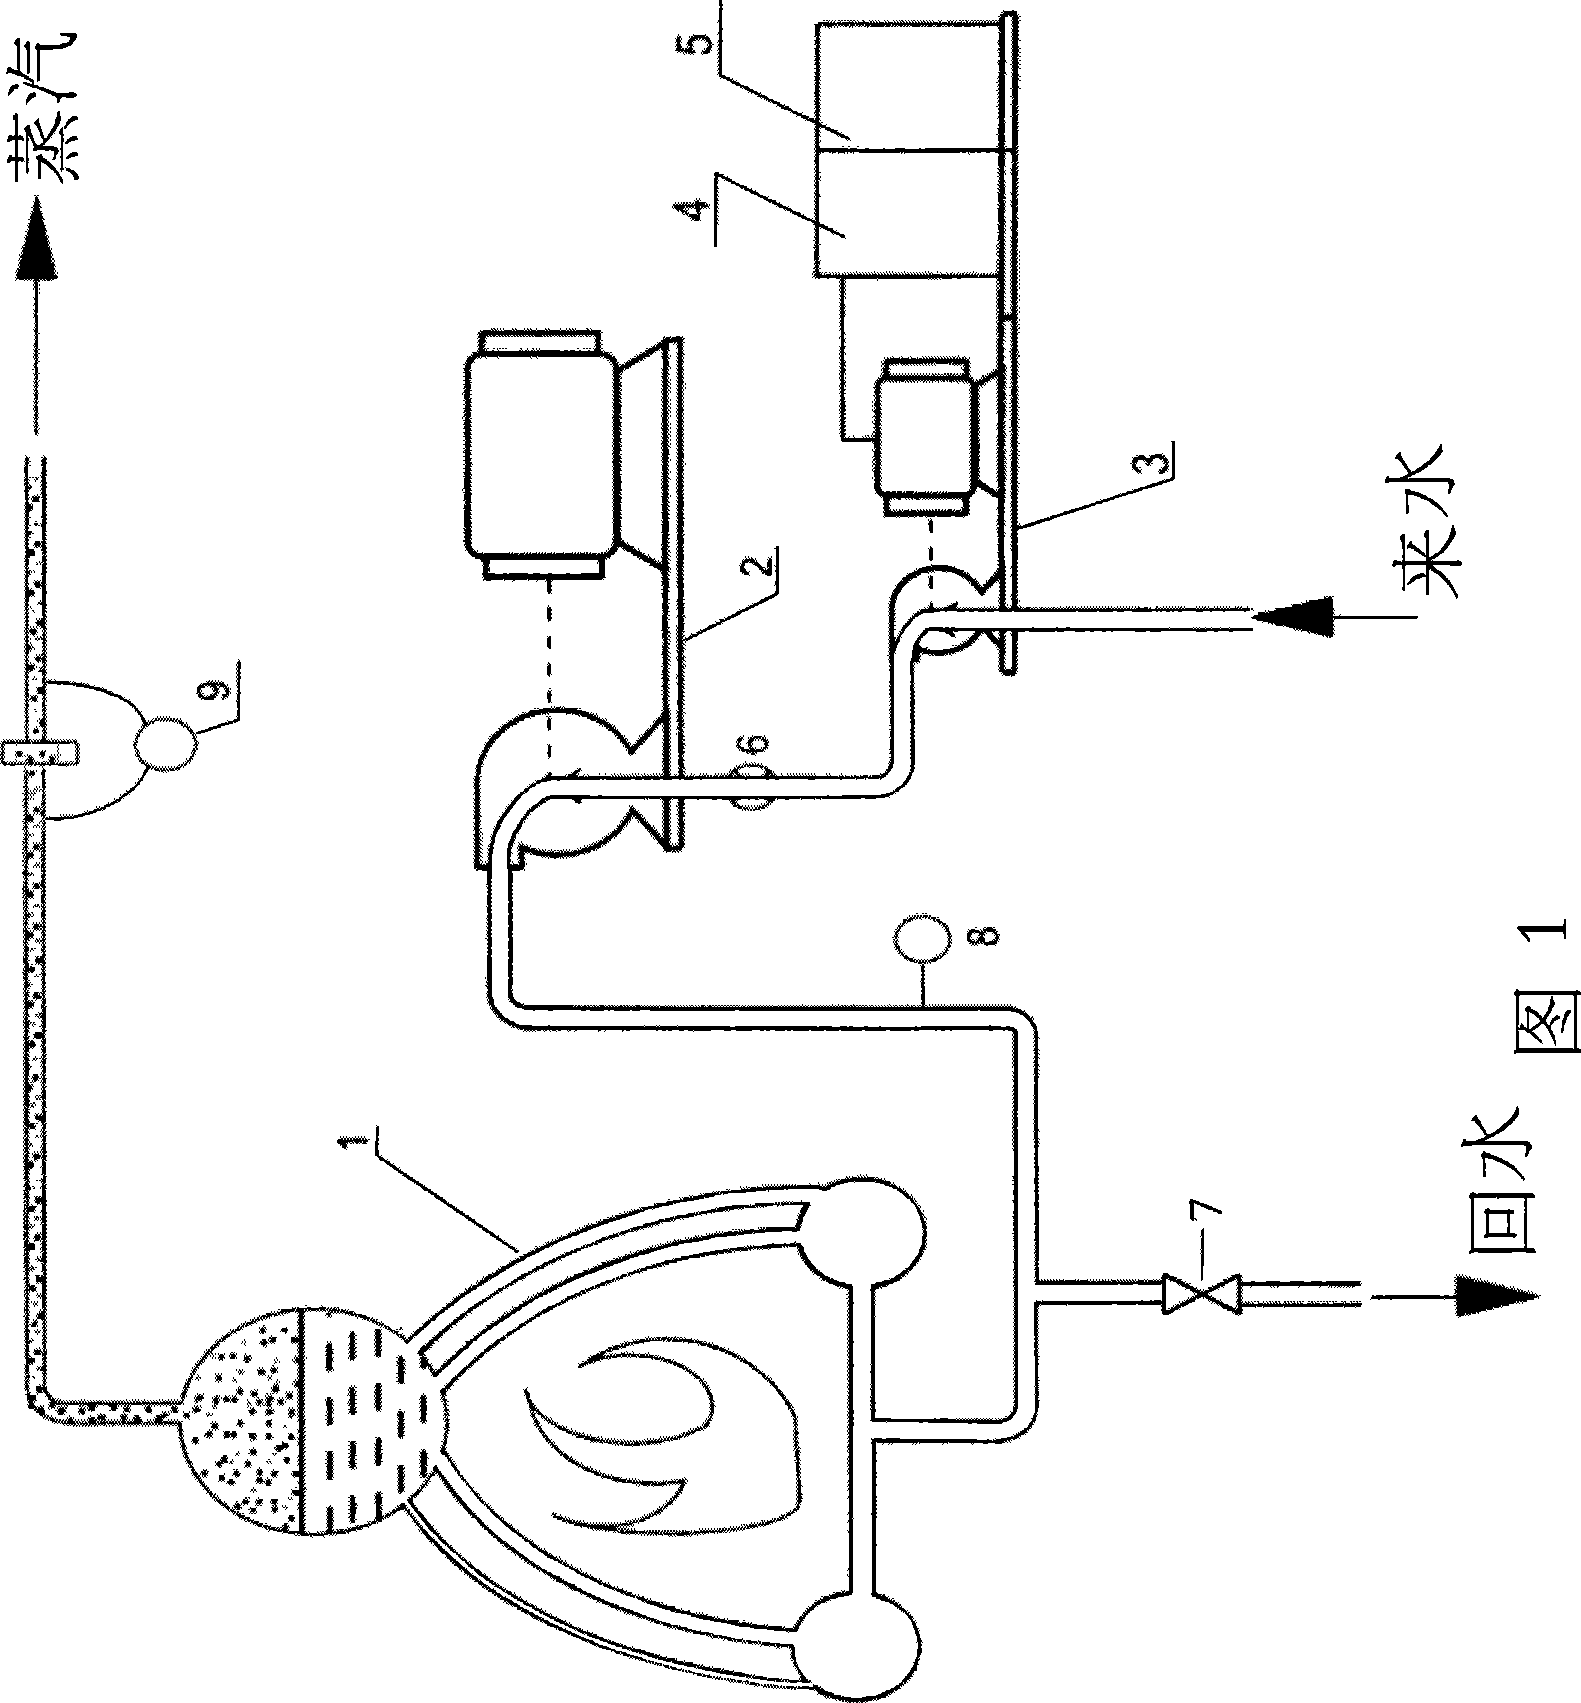 Water feed flow control and pressure compensating system of boiler